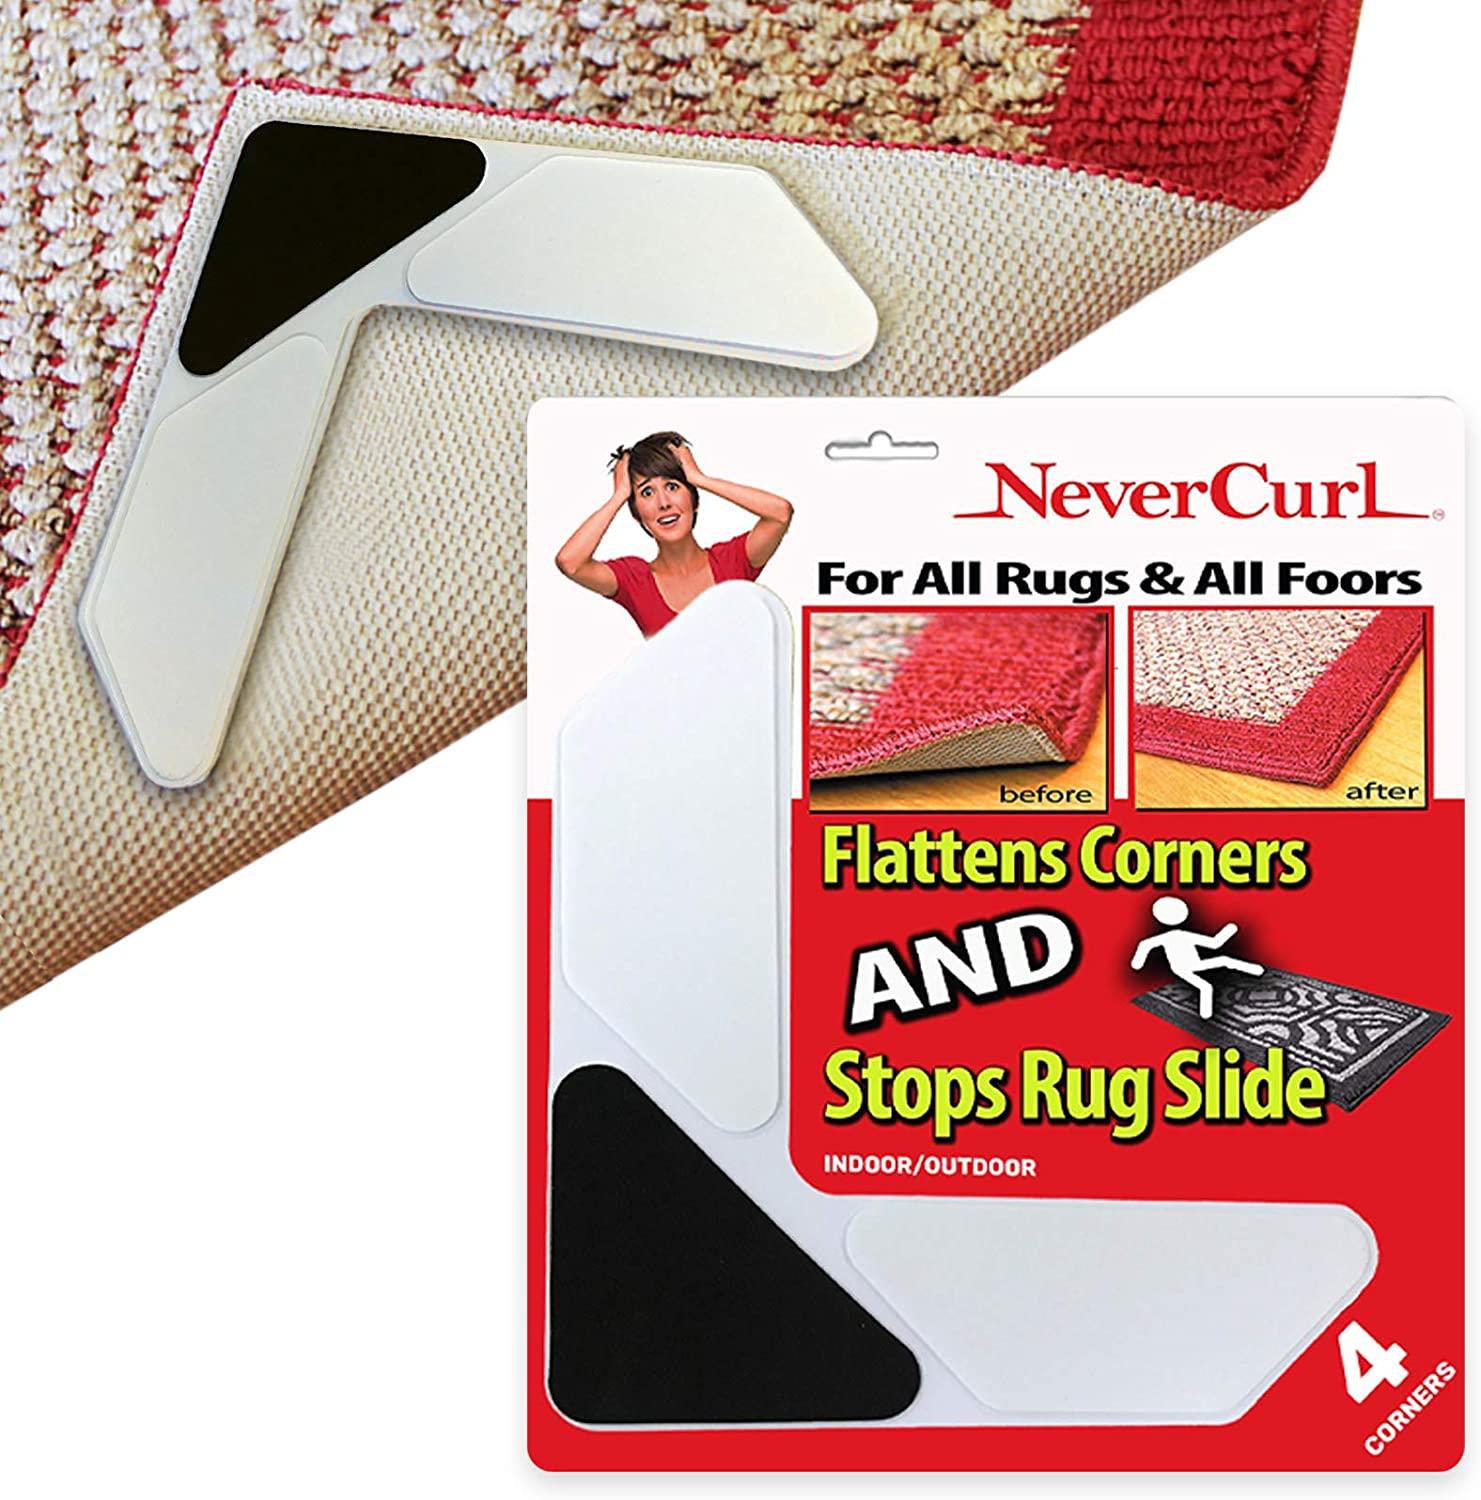 Home Techpro Rug Pad Gripper for Hardwood Floors, Washable Grippers for  Rug, “Vacuum TECH” - New Materials to Non Slip Rug Pads: Keep Your Rug in